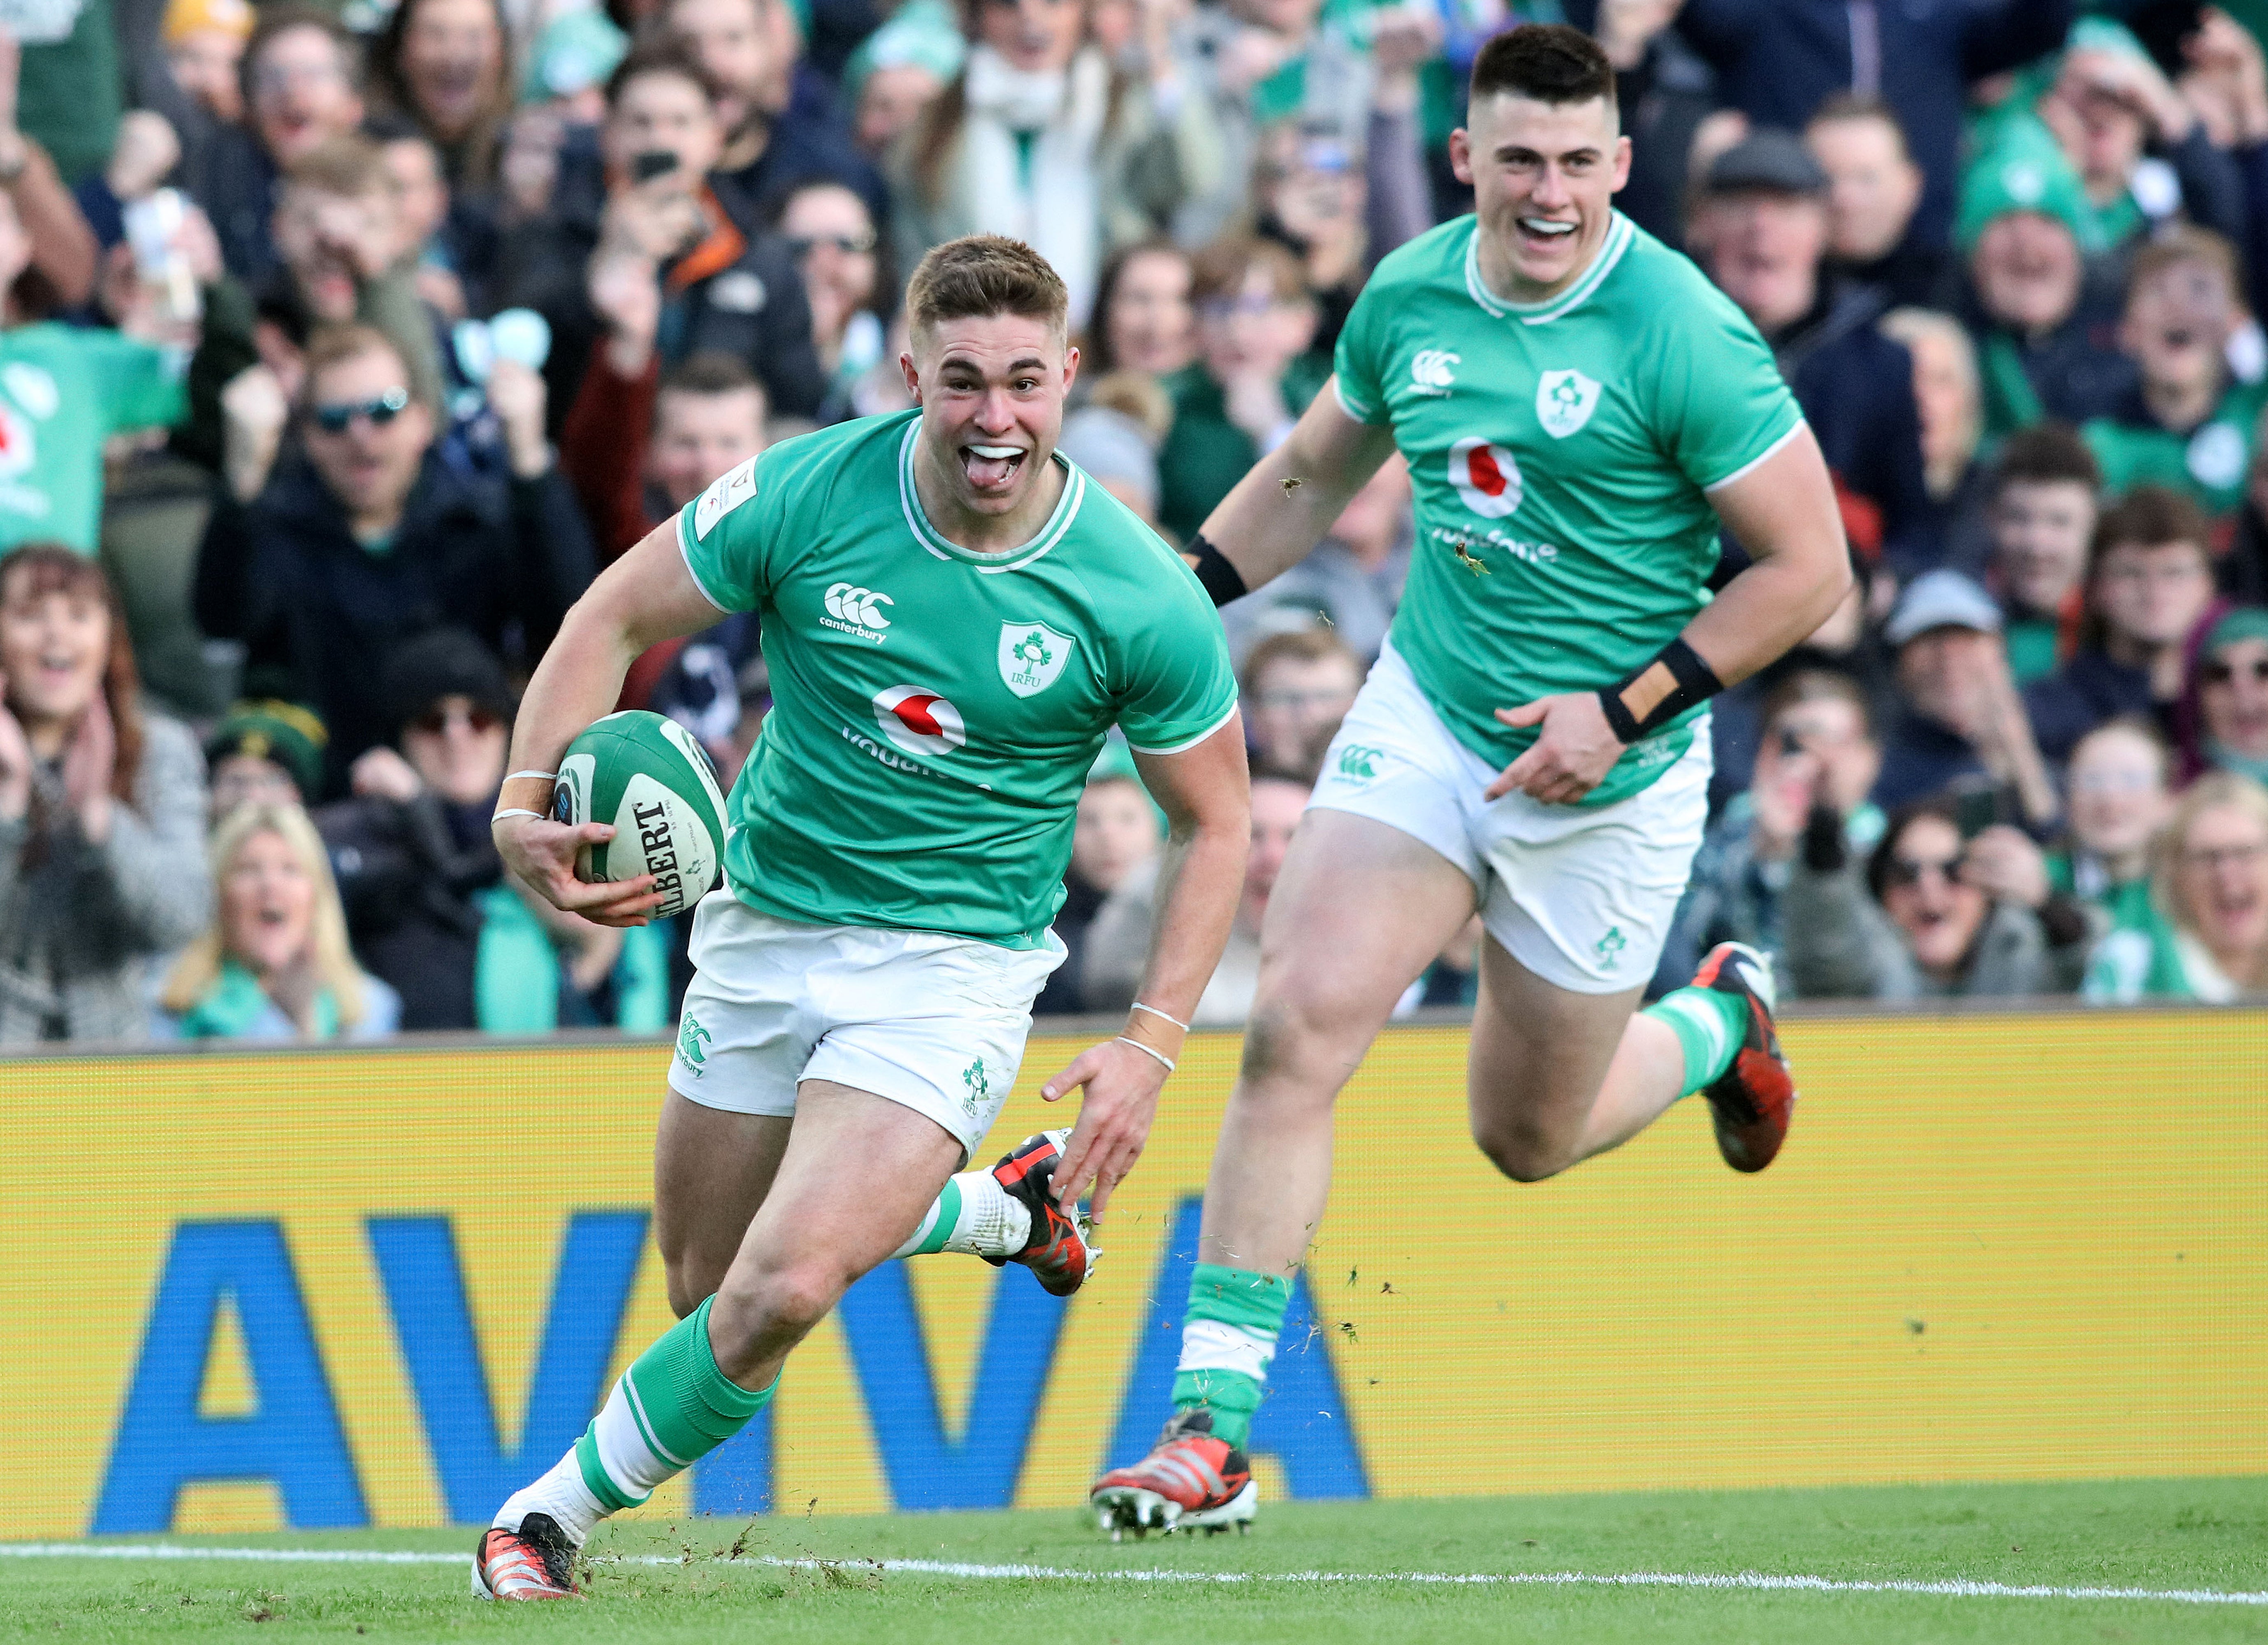 Jack Crowley scored his first try for Ireland as Andy Farrell’s men eased to victory